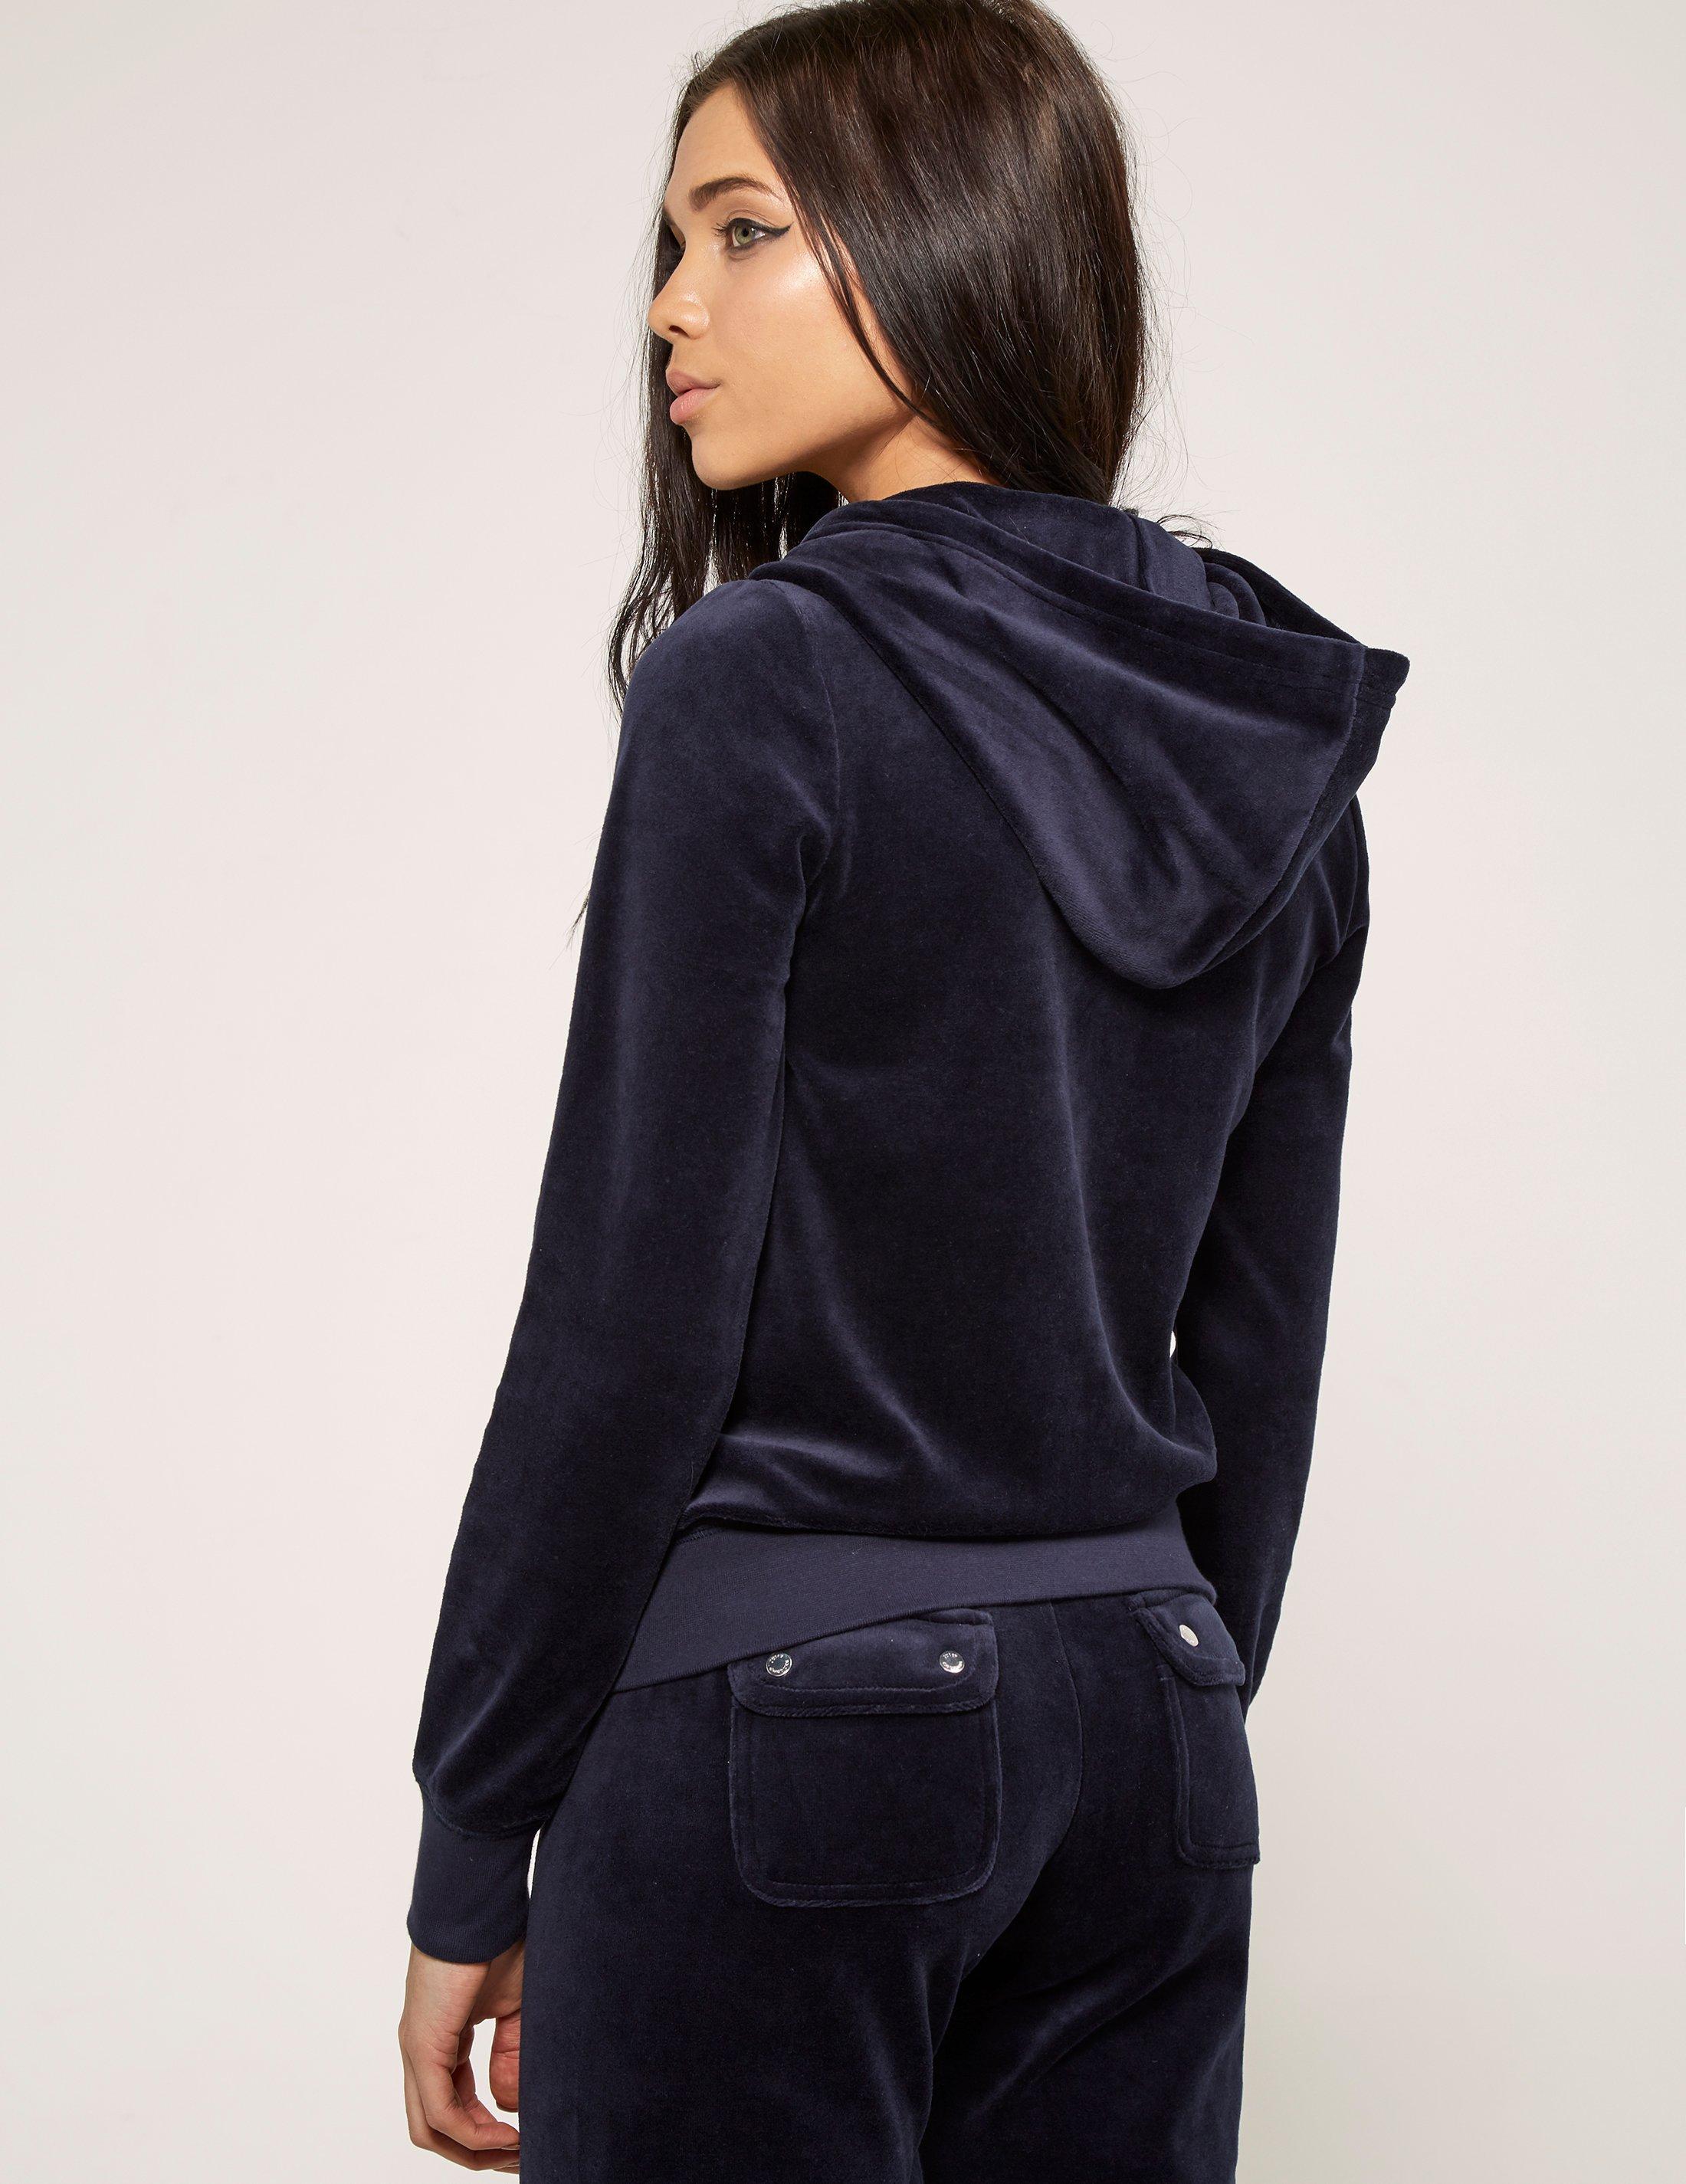 Juicy Couture Robertson Velour Jacket in Navy (Blue) - Lyst